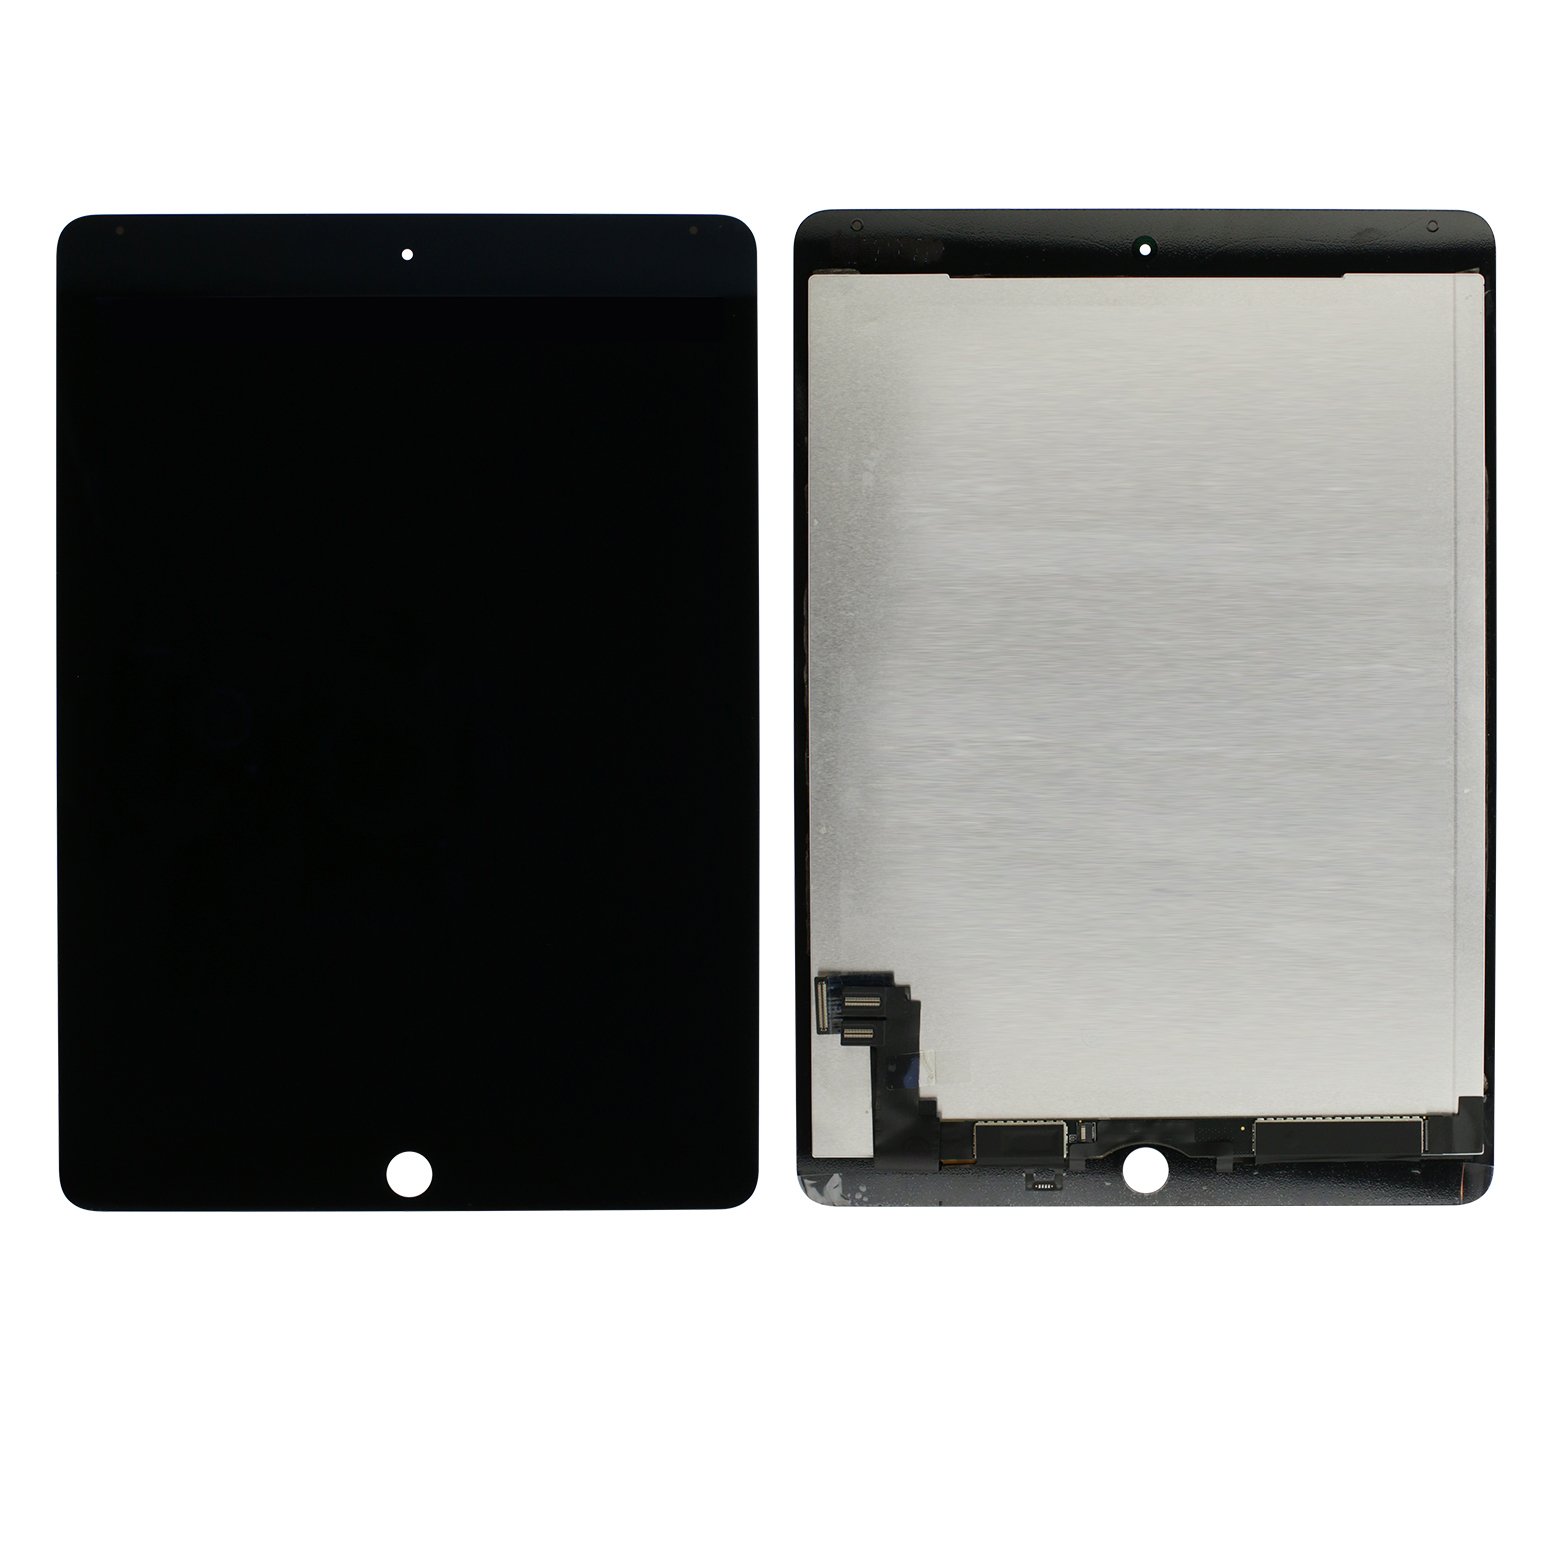 Display completo touch   LCD para iPad Air 2 preto